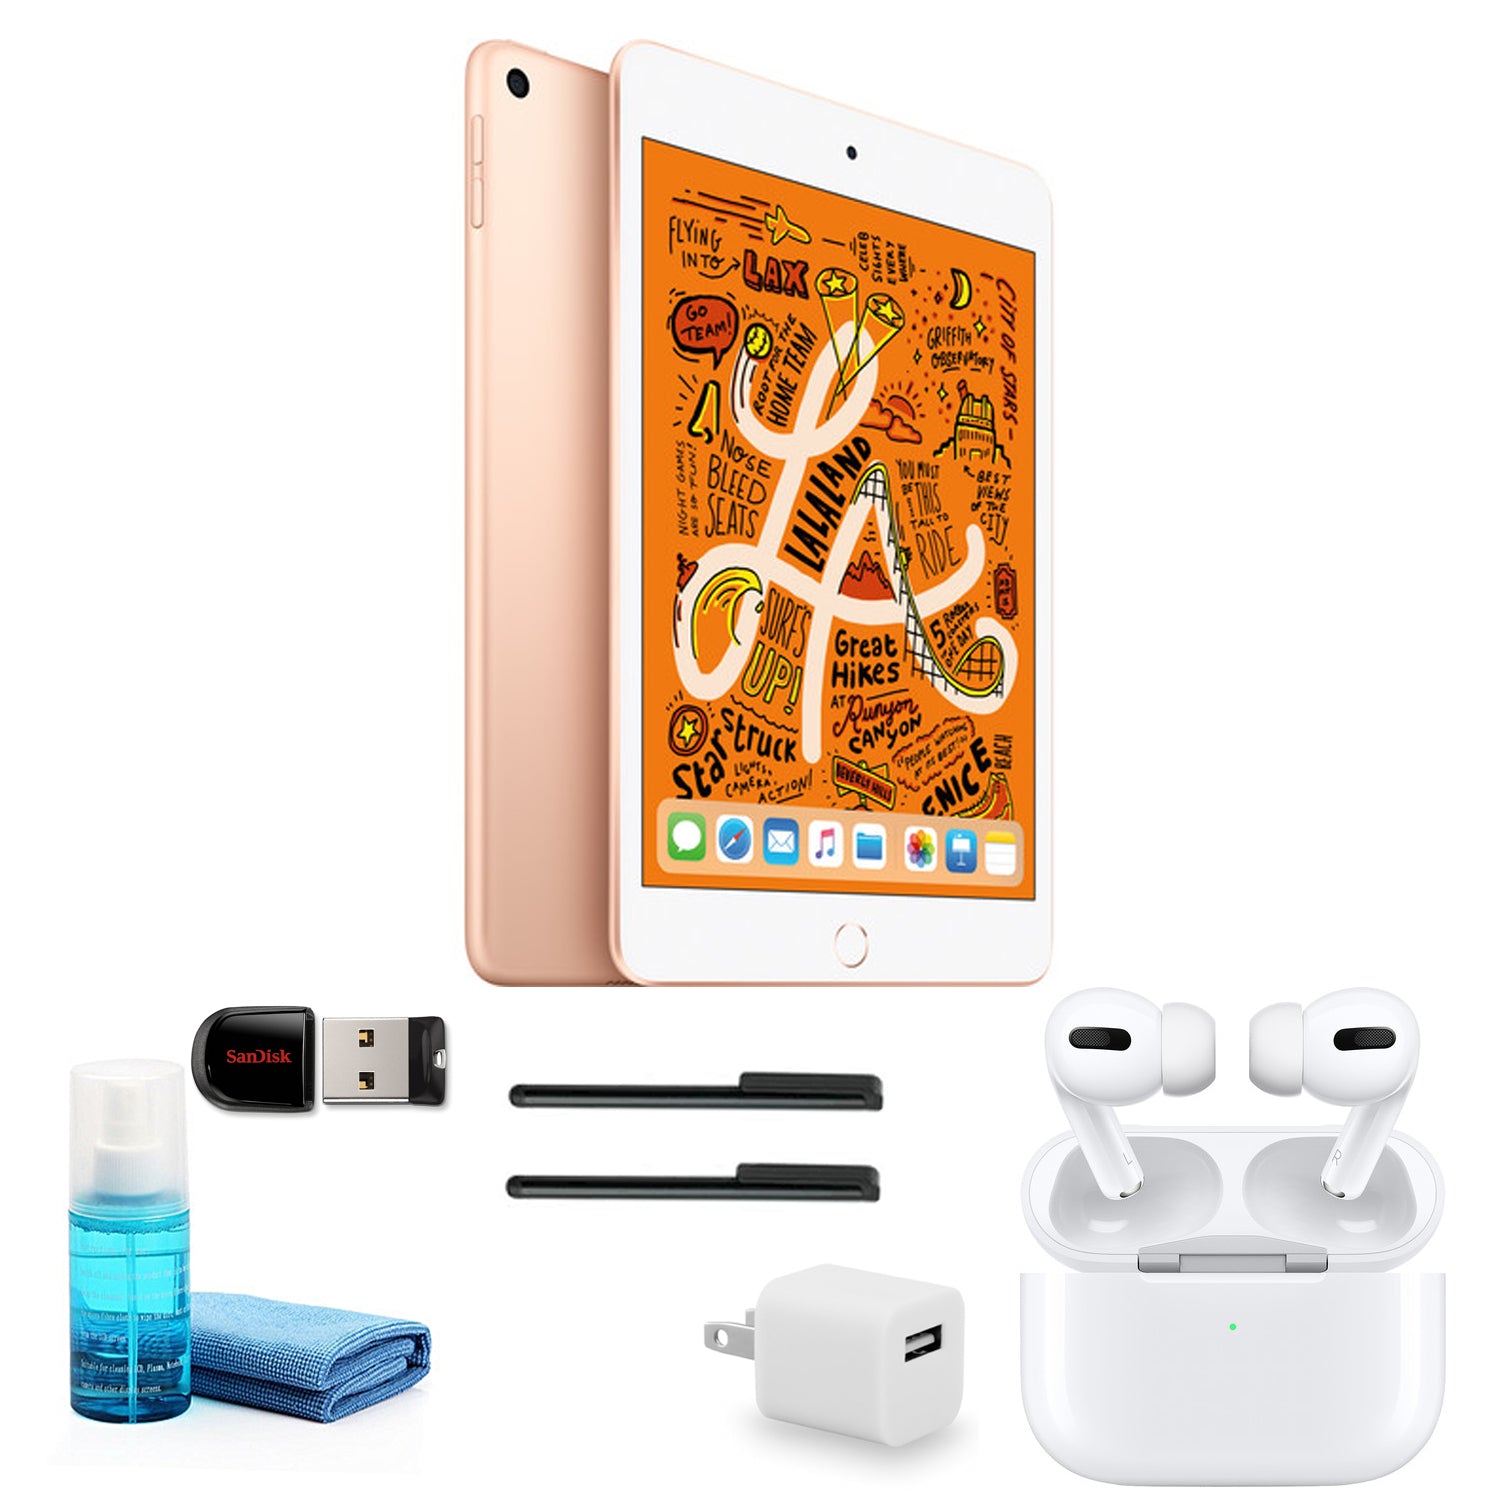 Apple iPad mini 7.9 Inch (64GB, Gold) with Apple AirPods Pro